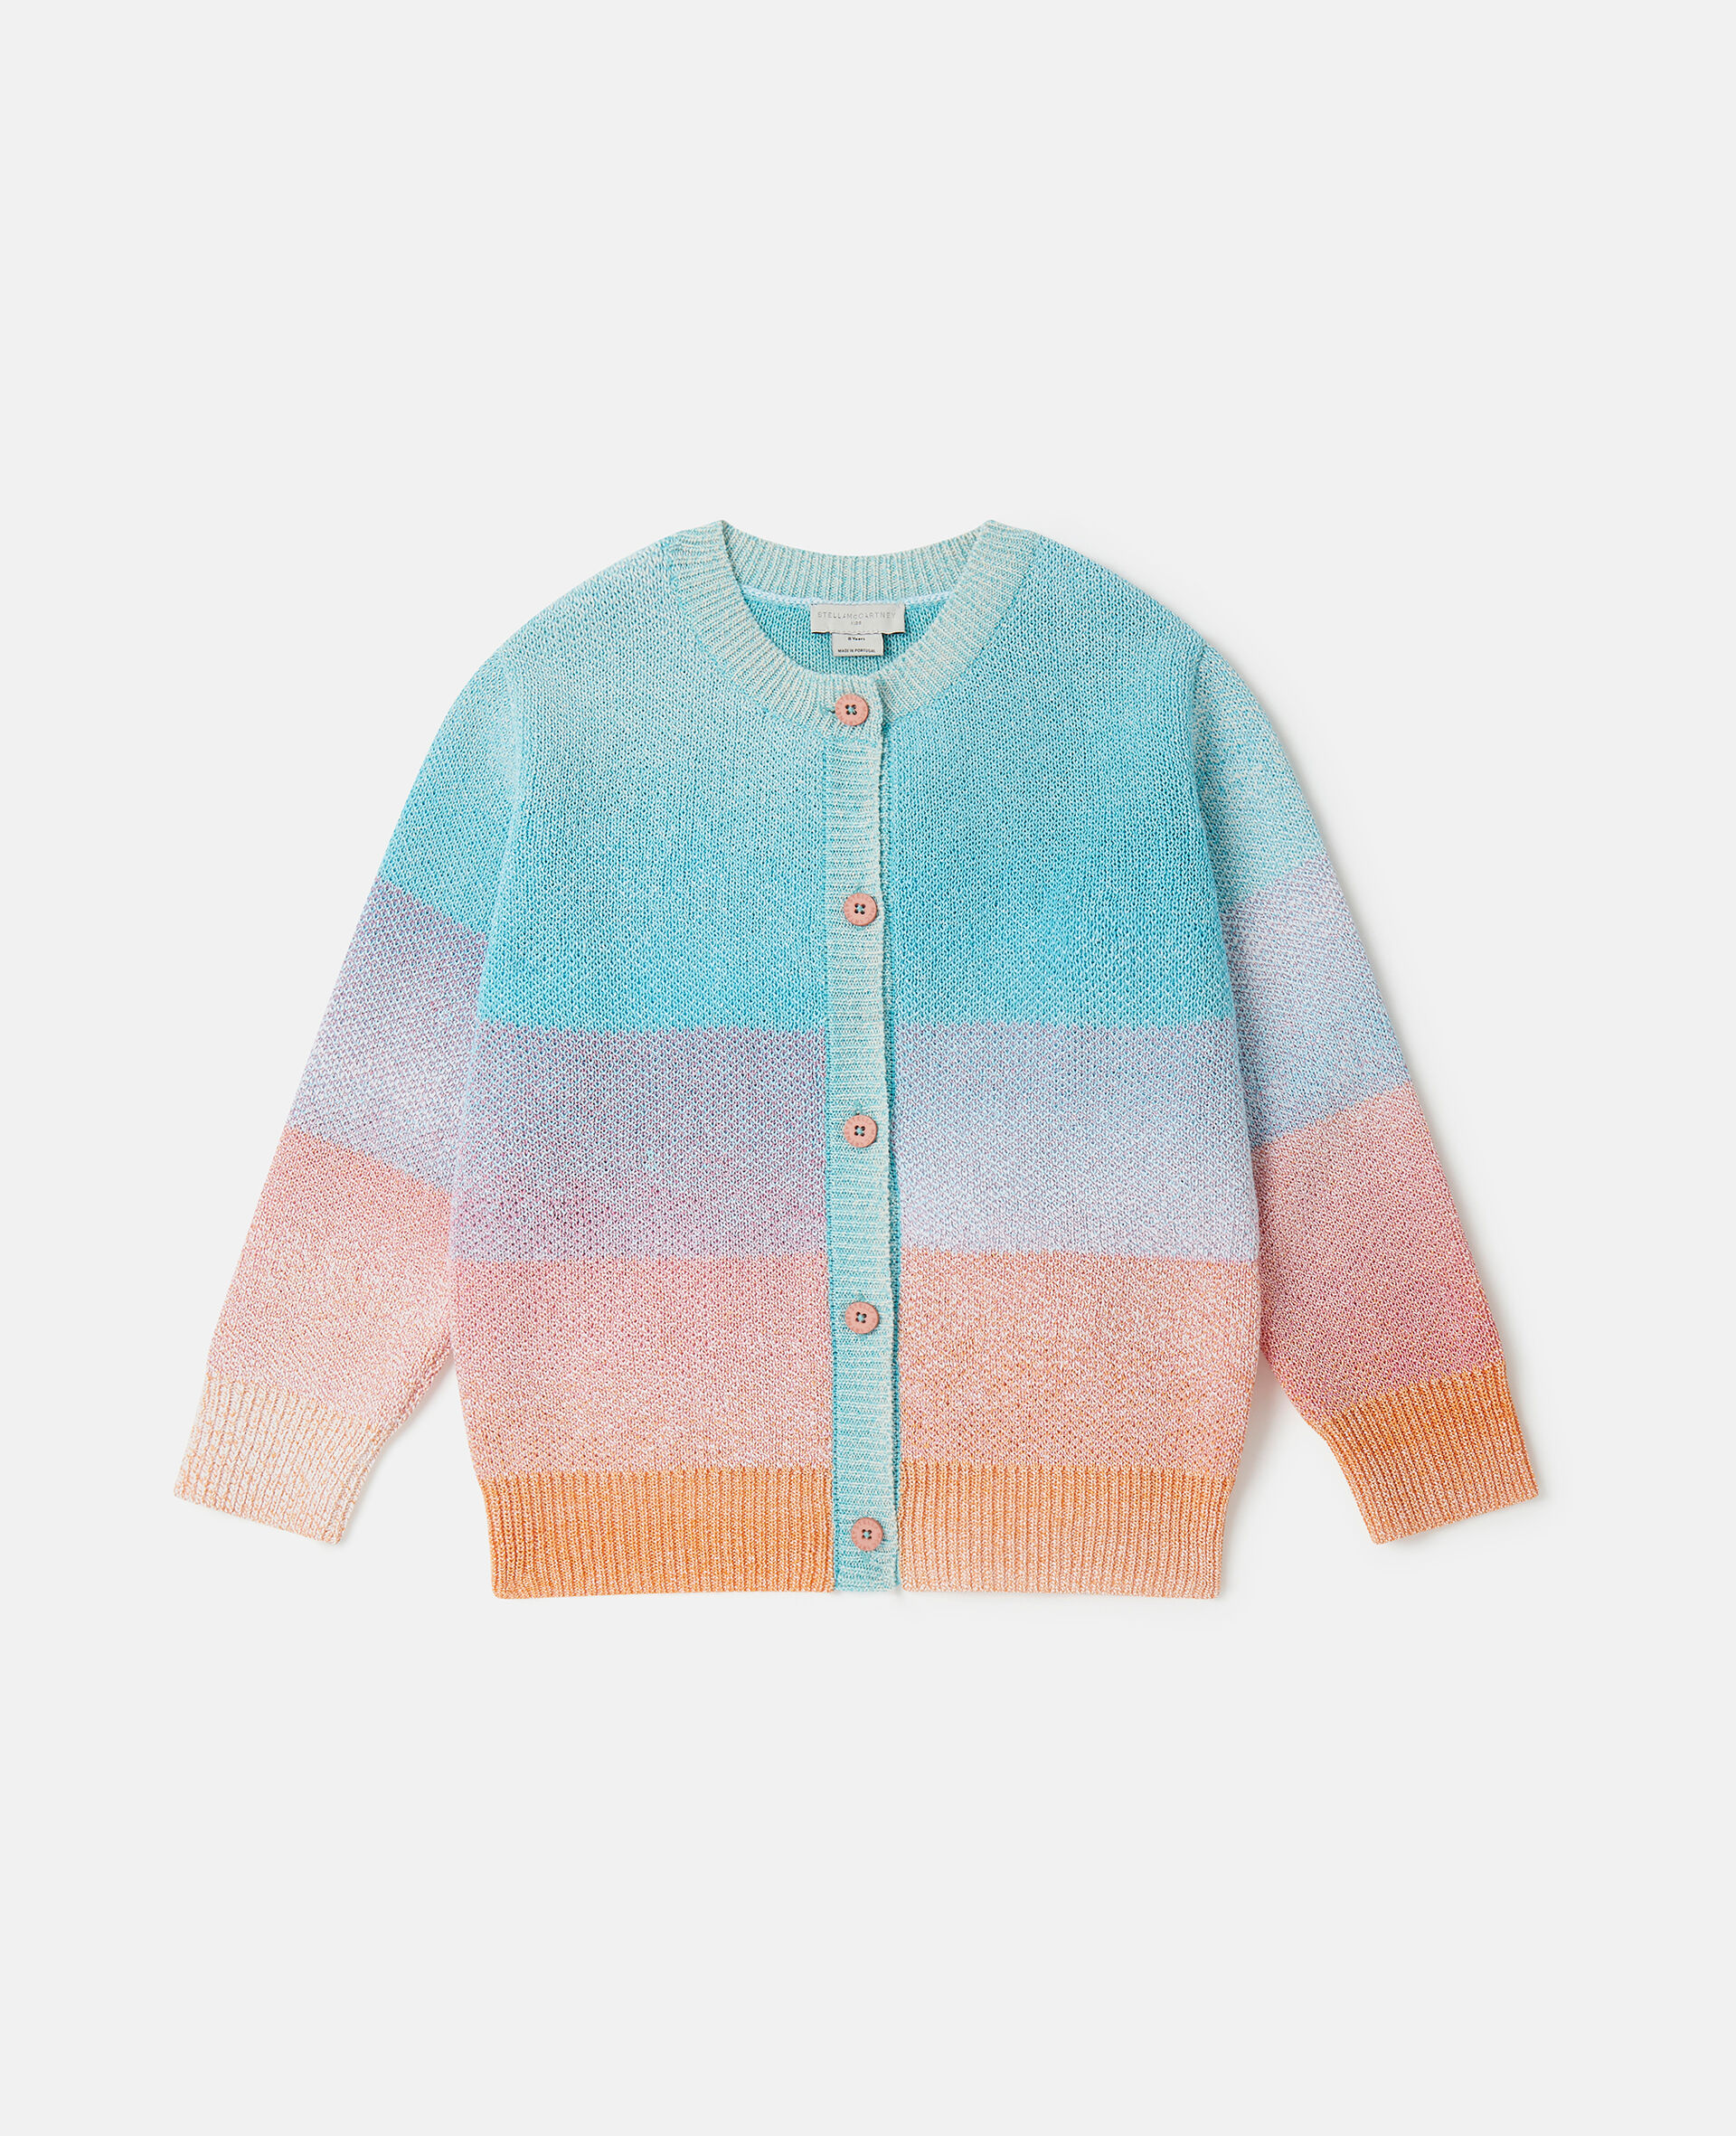 Striped Cardigan-Multicolored-large image number 0